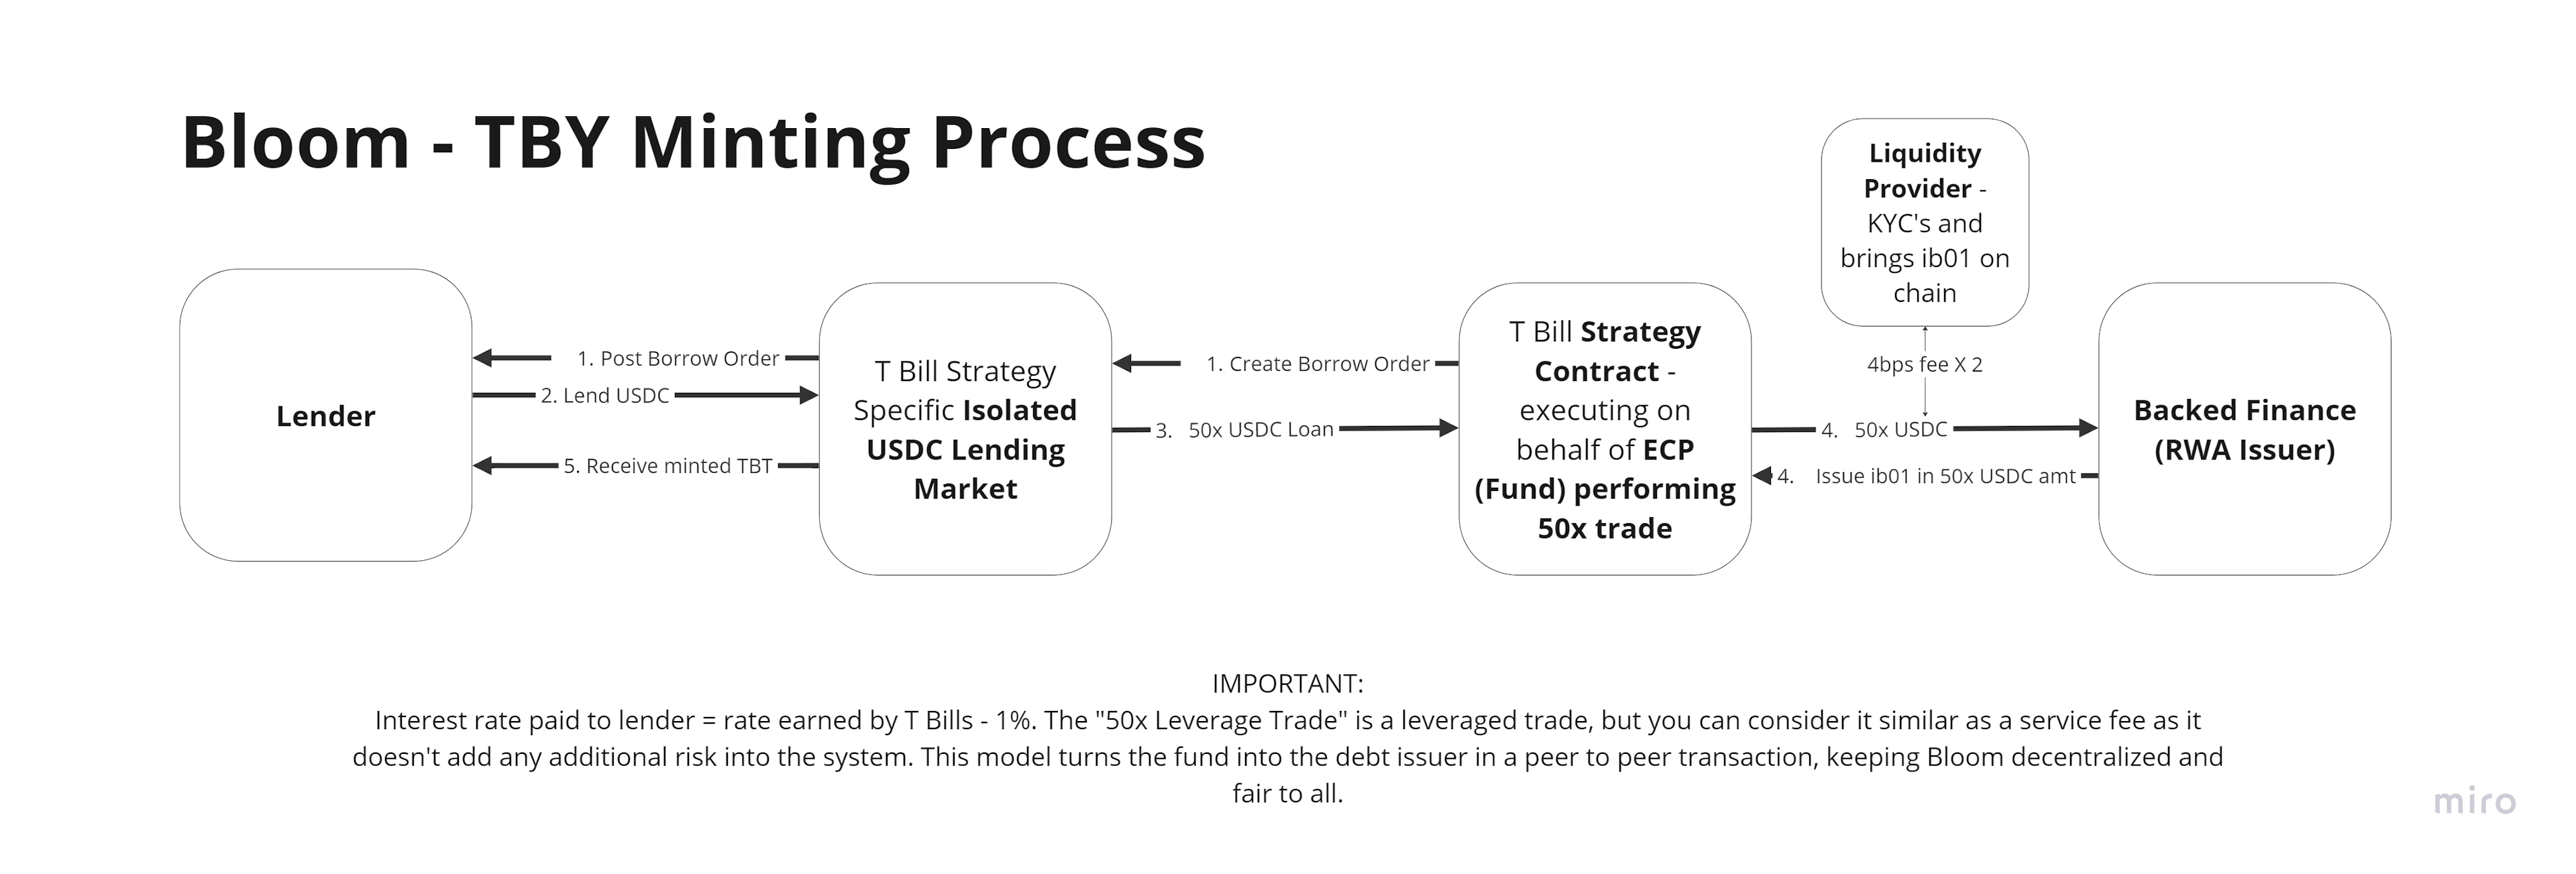 Bloom Protocol facilitates levered treasury bill strategies by sourcing USDC financing